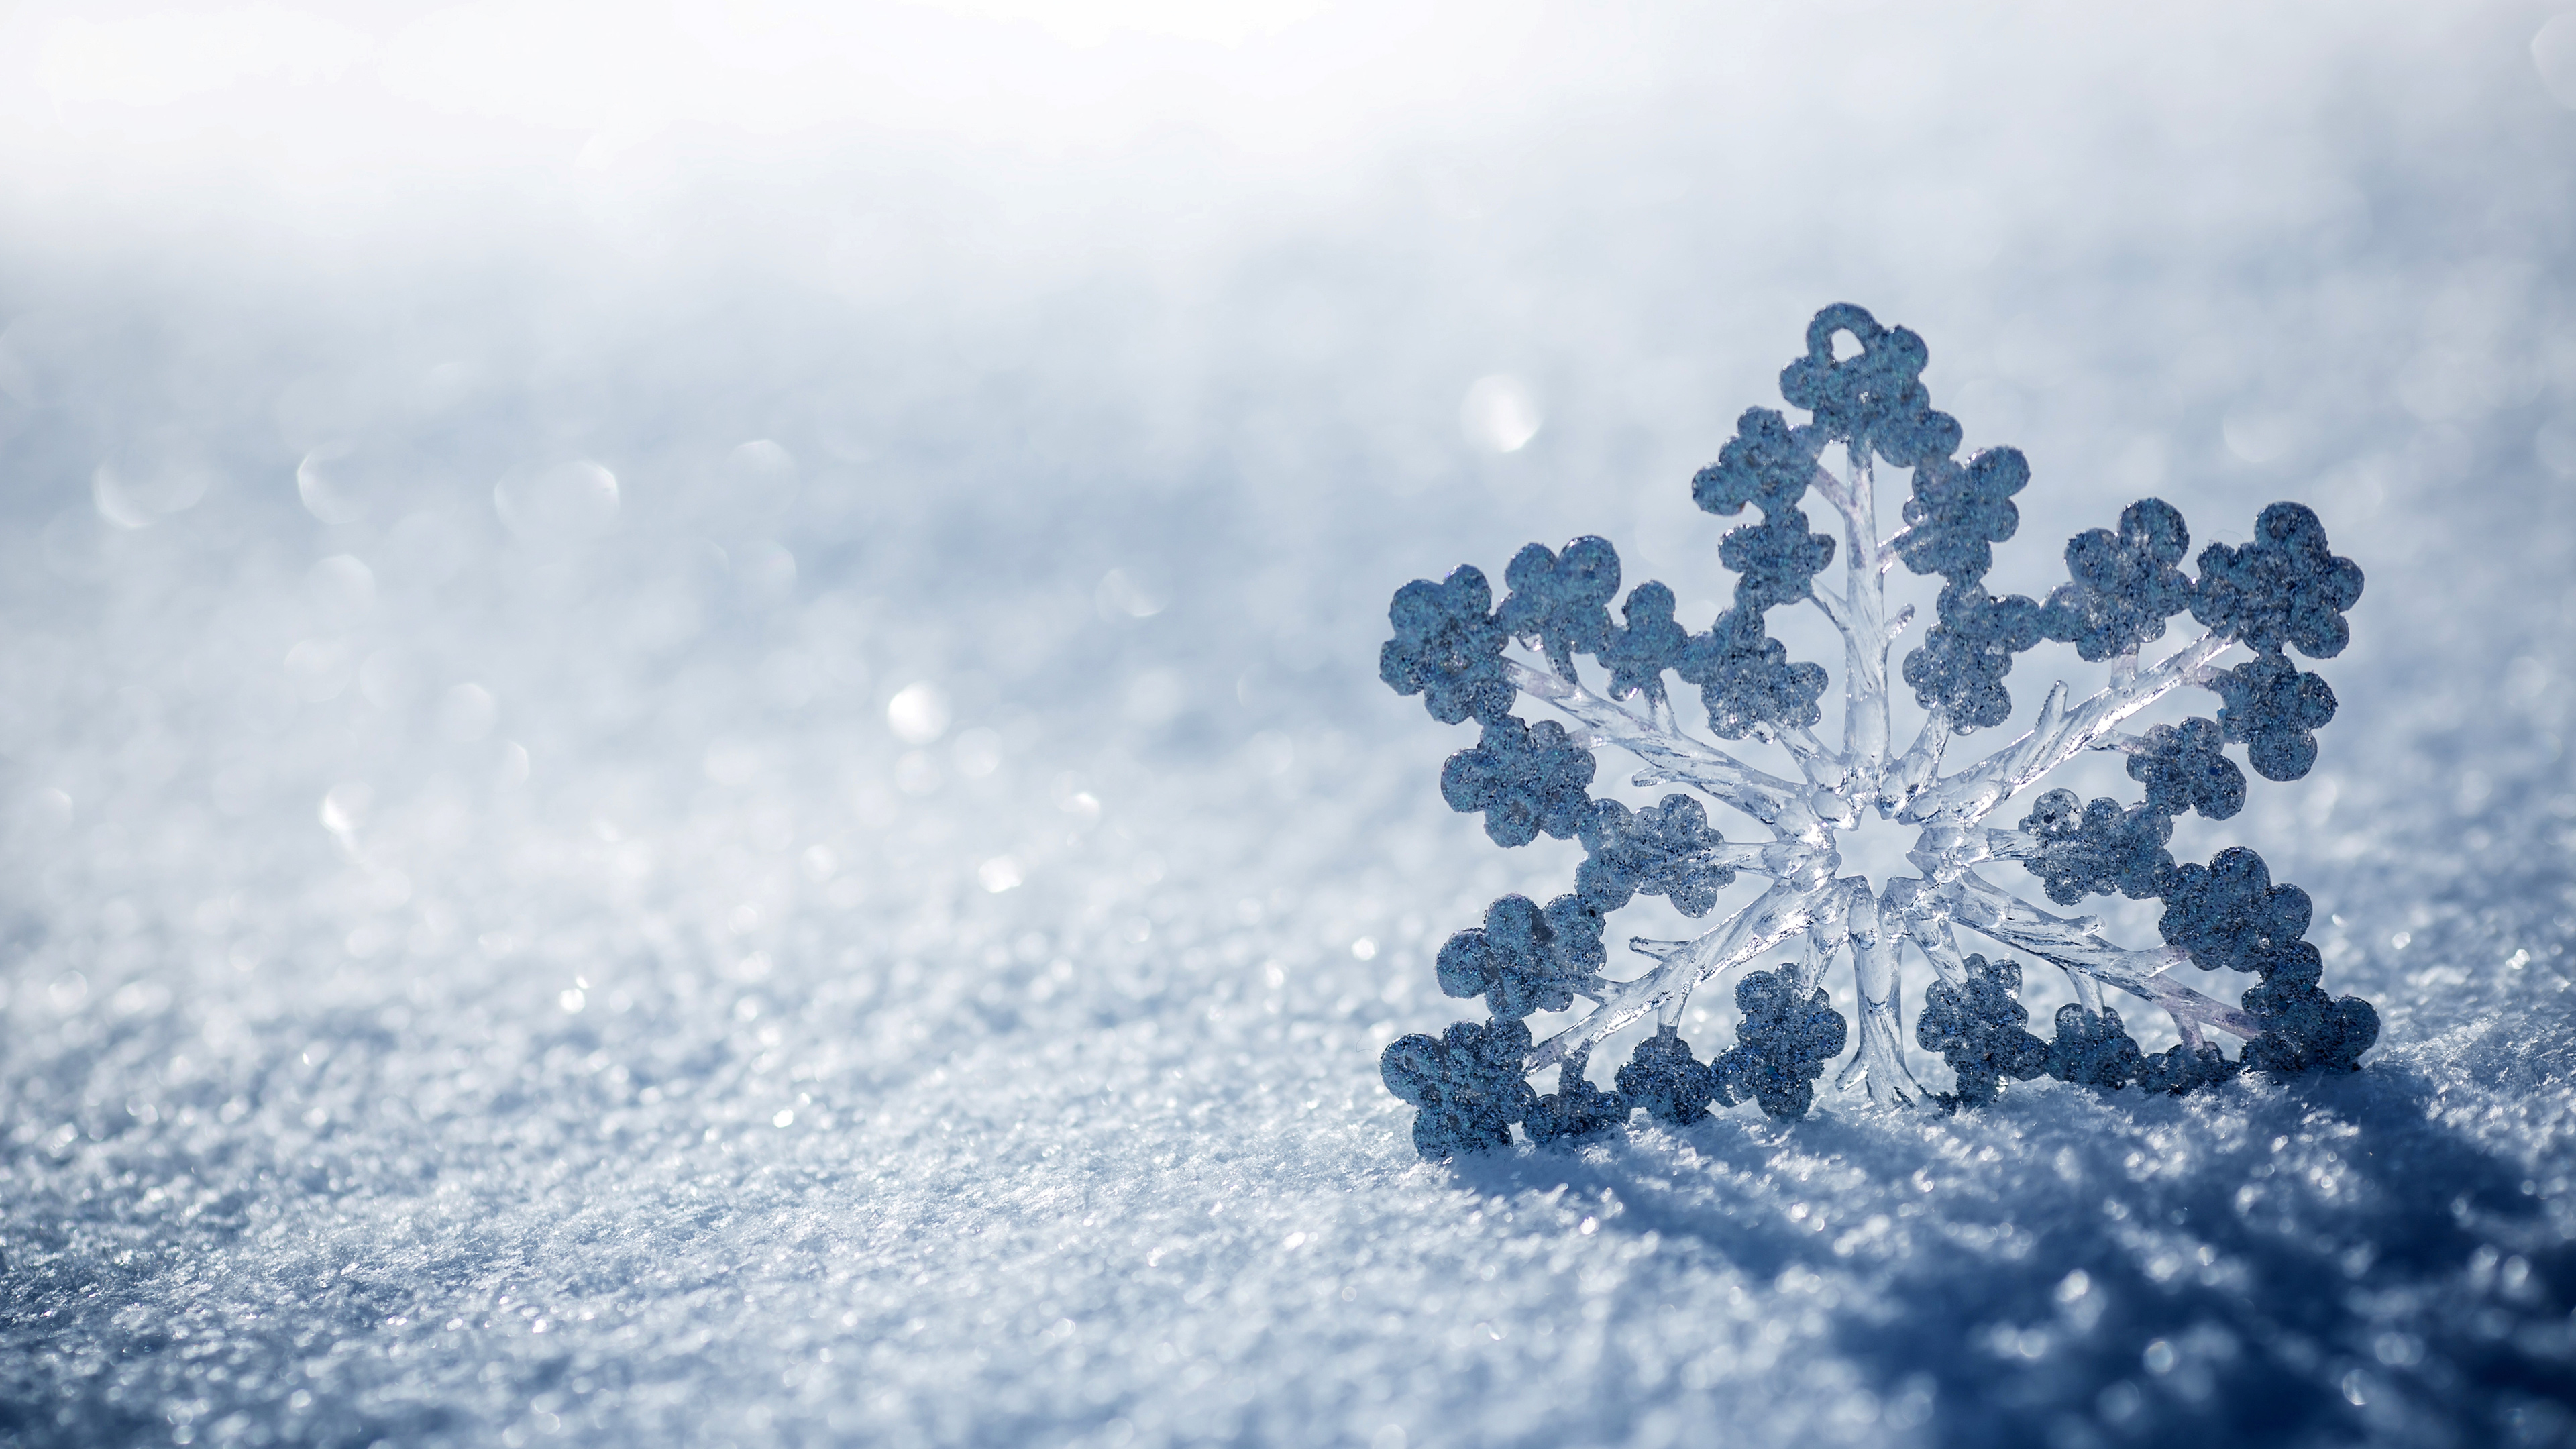 3840x2160 20+ Snowflake HD Wallpapers and Backgrounds